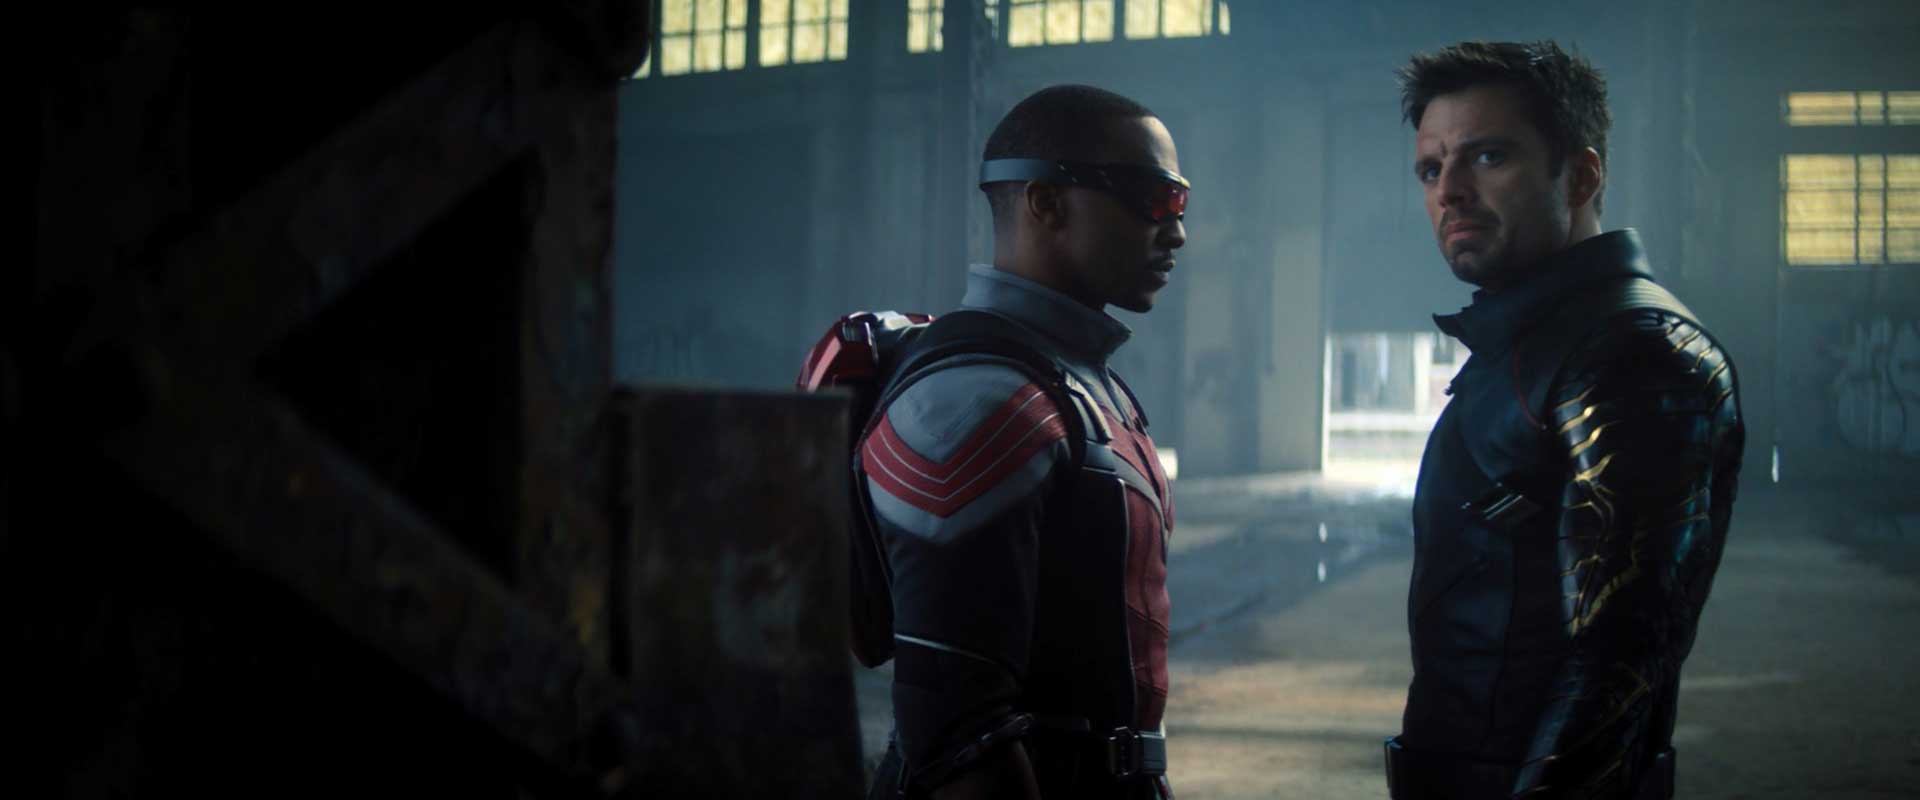 The Falcon and the Winter Soldier Episode 2 Still 2